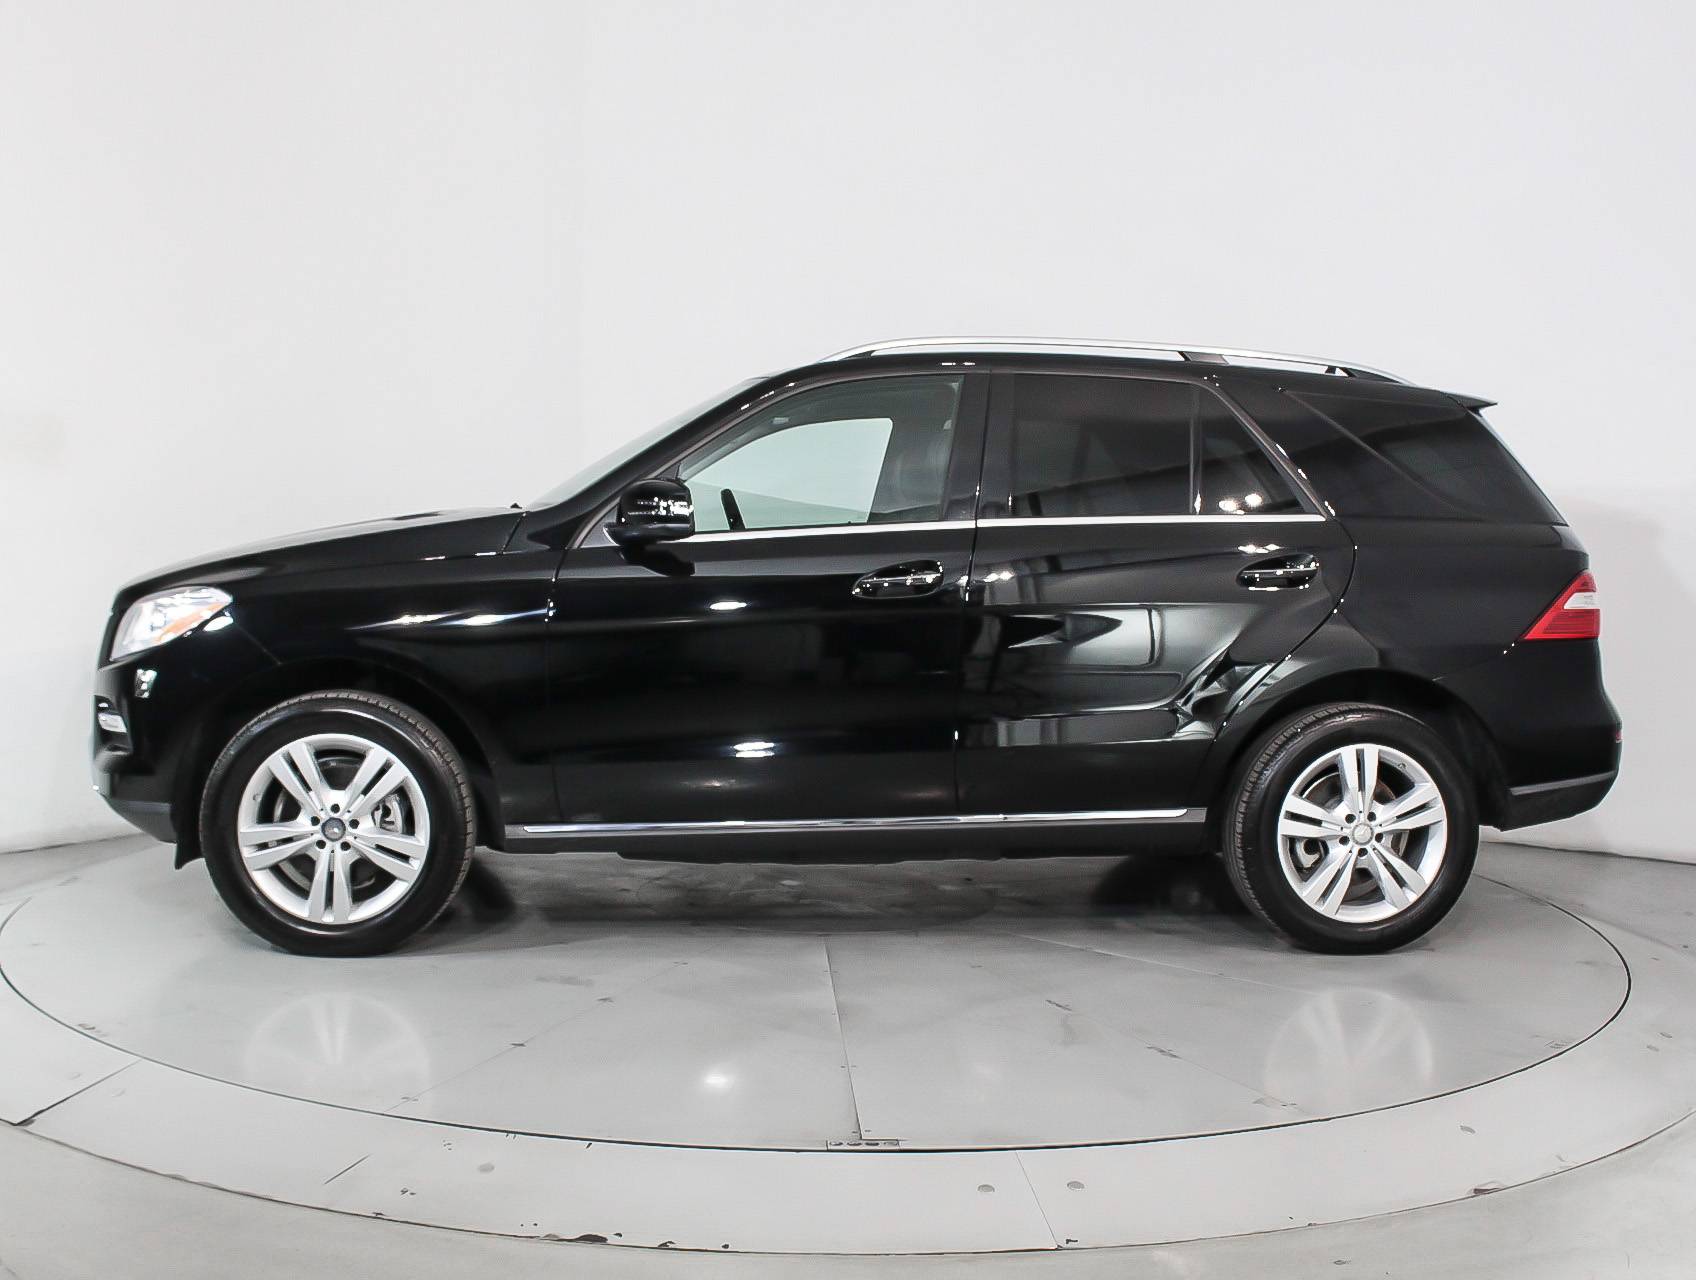 Used 2015 MERCEDES-BENZ M CLASS ML350 for sale in MIAMI | 95700